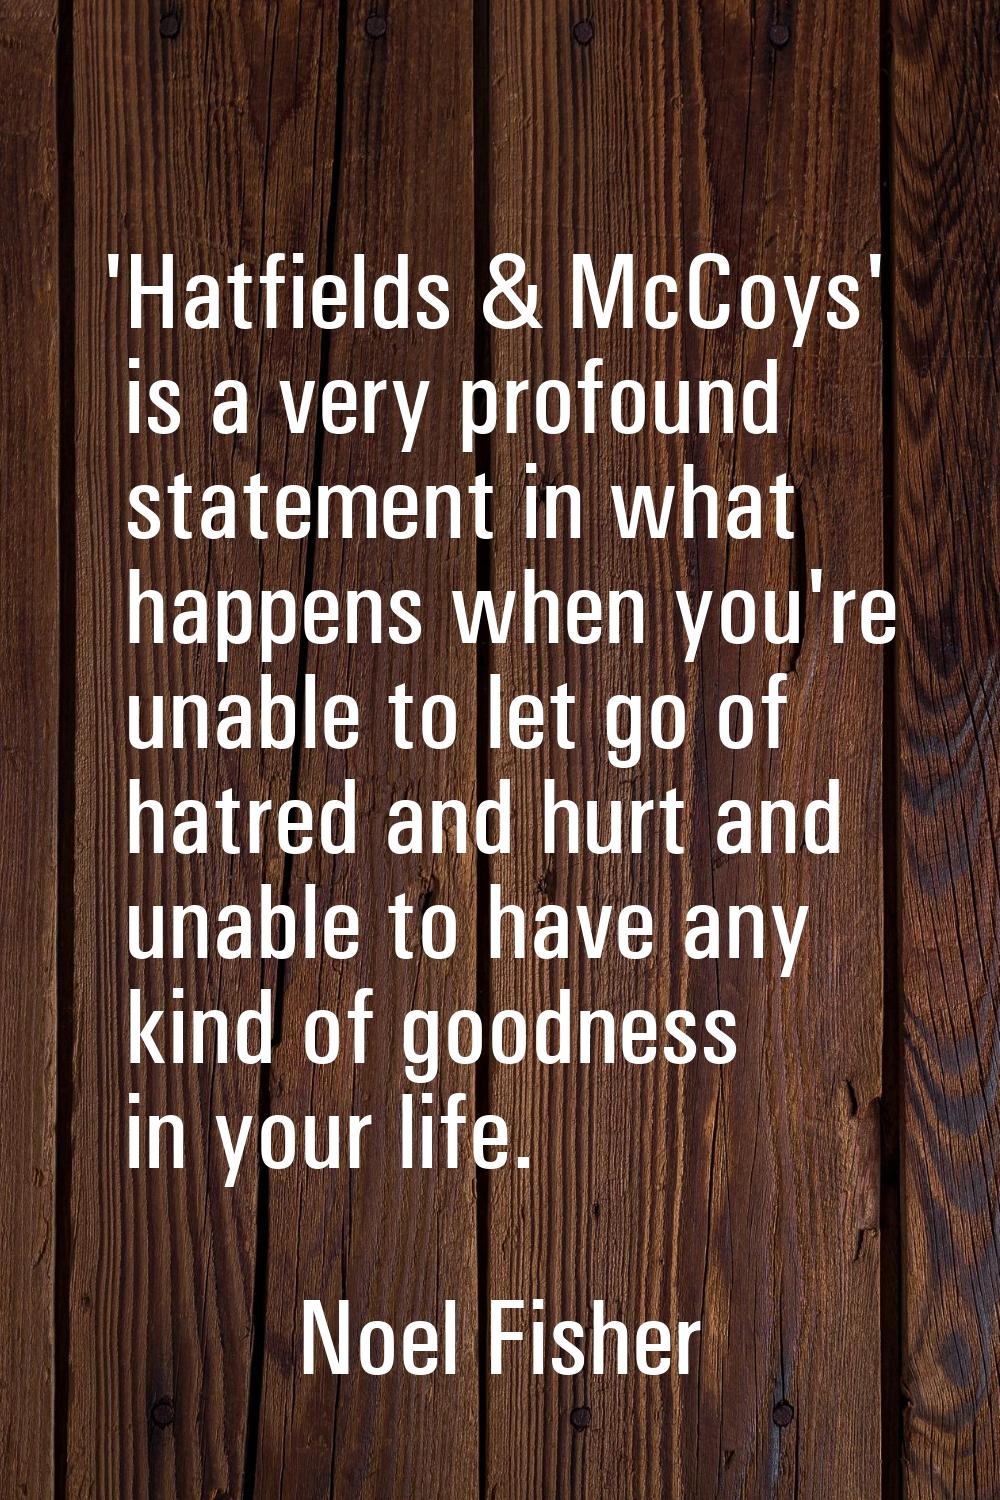 'Hatfields & McCoys' is a very profound statement in what happens when you're unable to let go of h